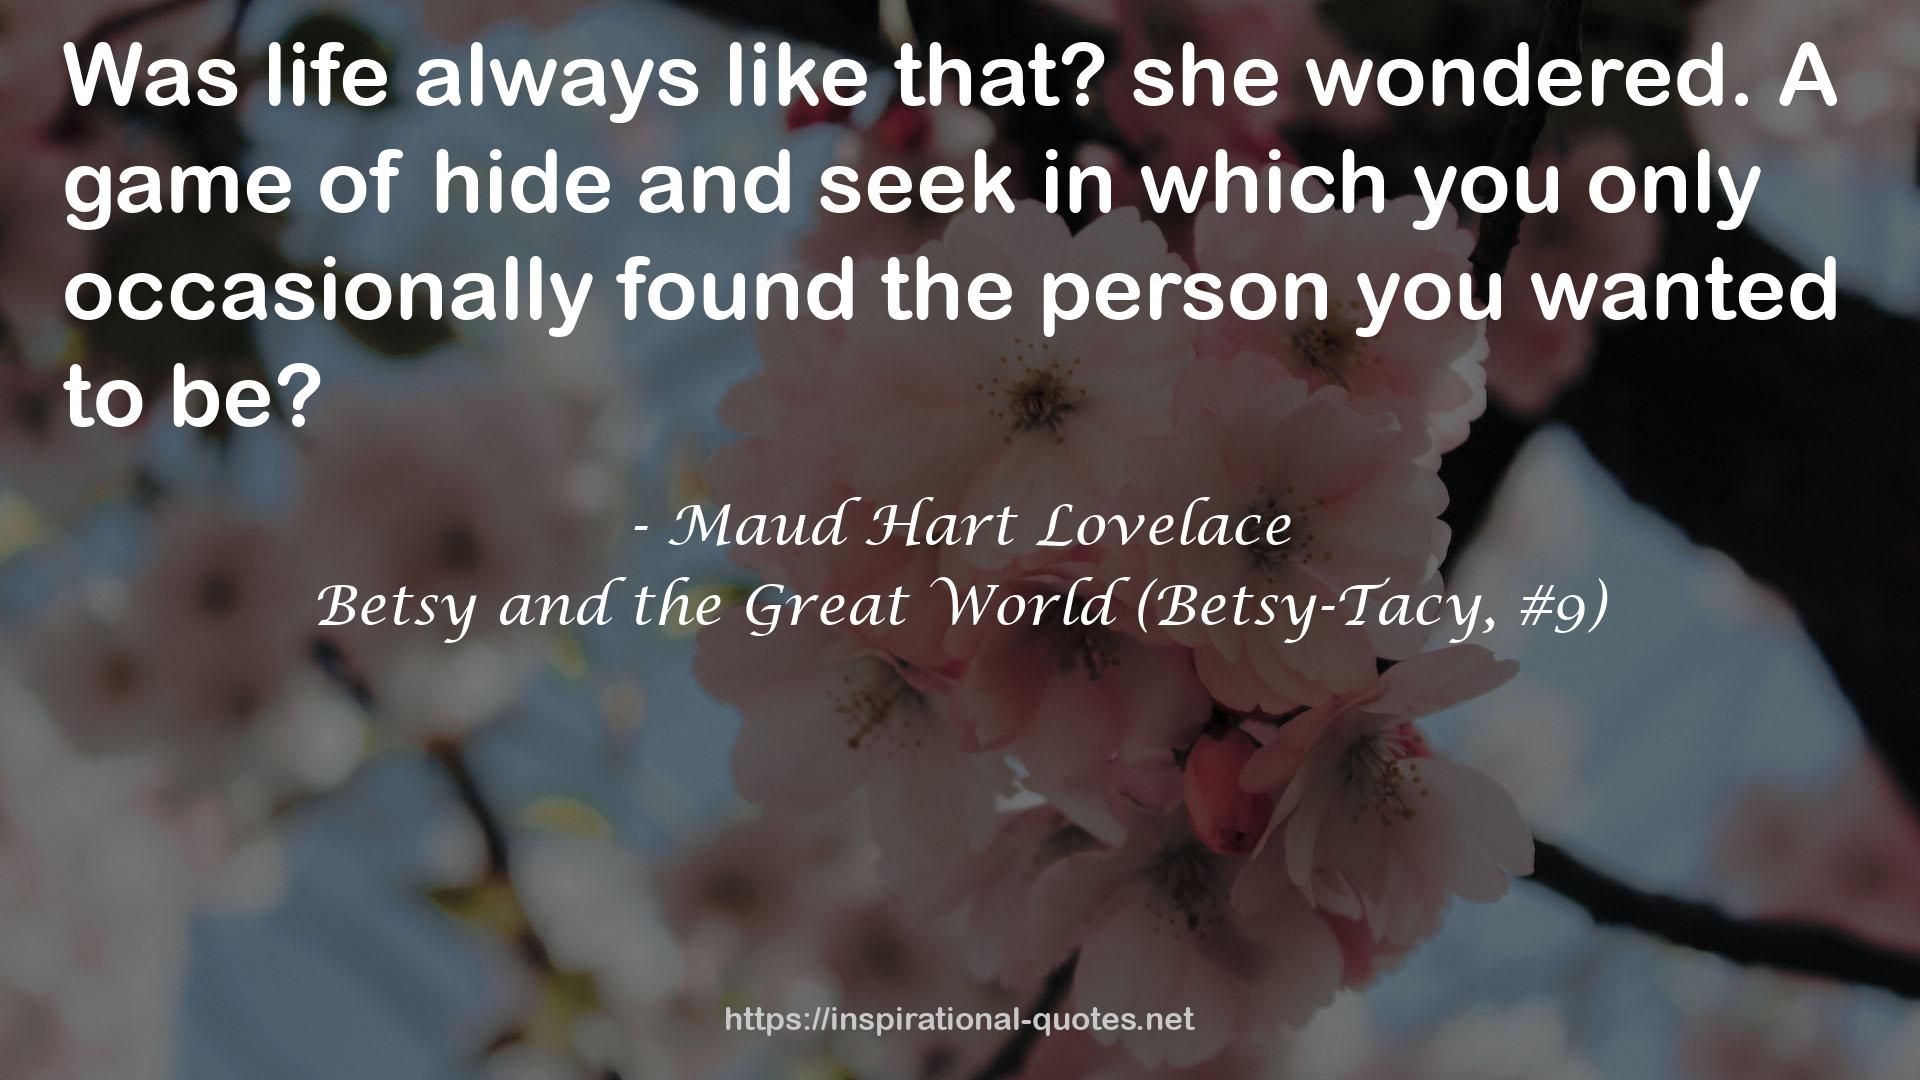 Maud Hart Lovelace QUOTES